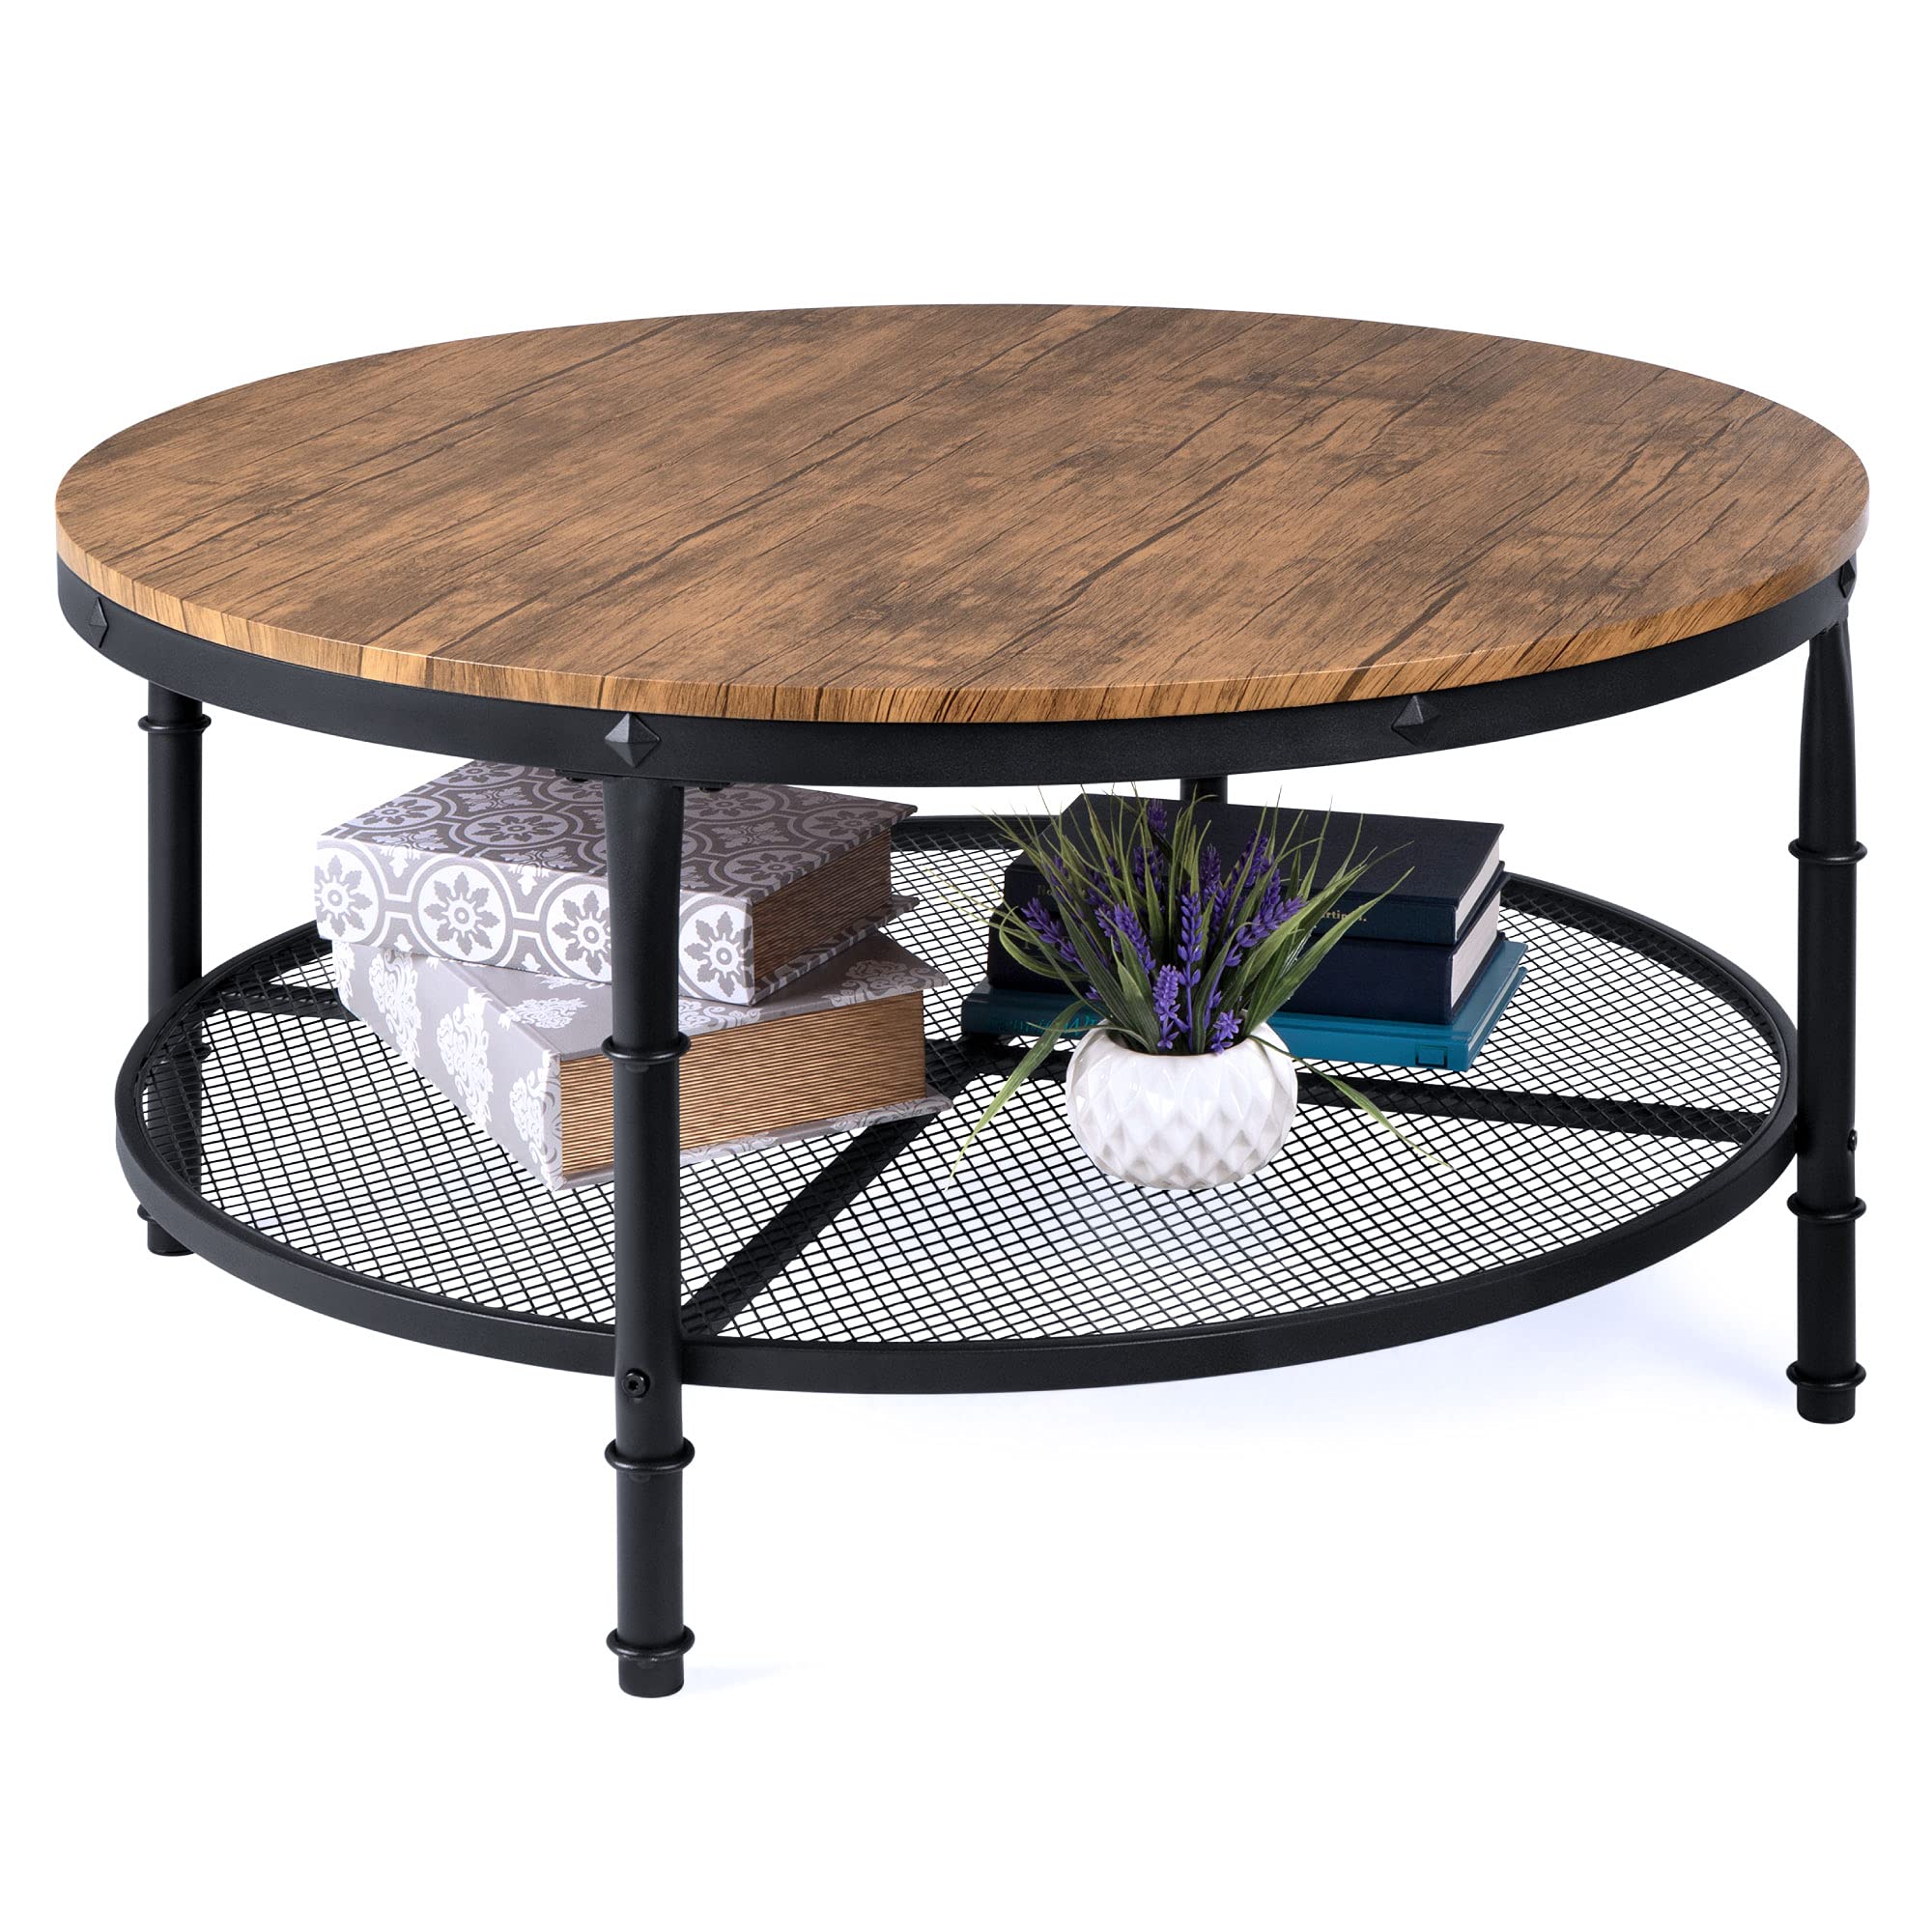  2-Tie Round Industrial Coffee Table Rustic Steel Accent Table Reinforced Crossbars